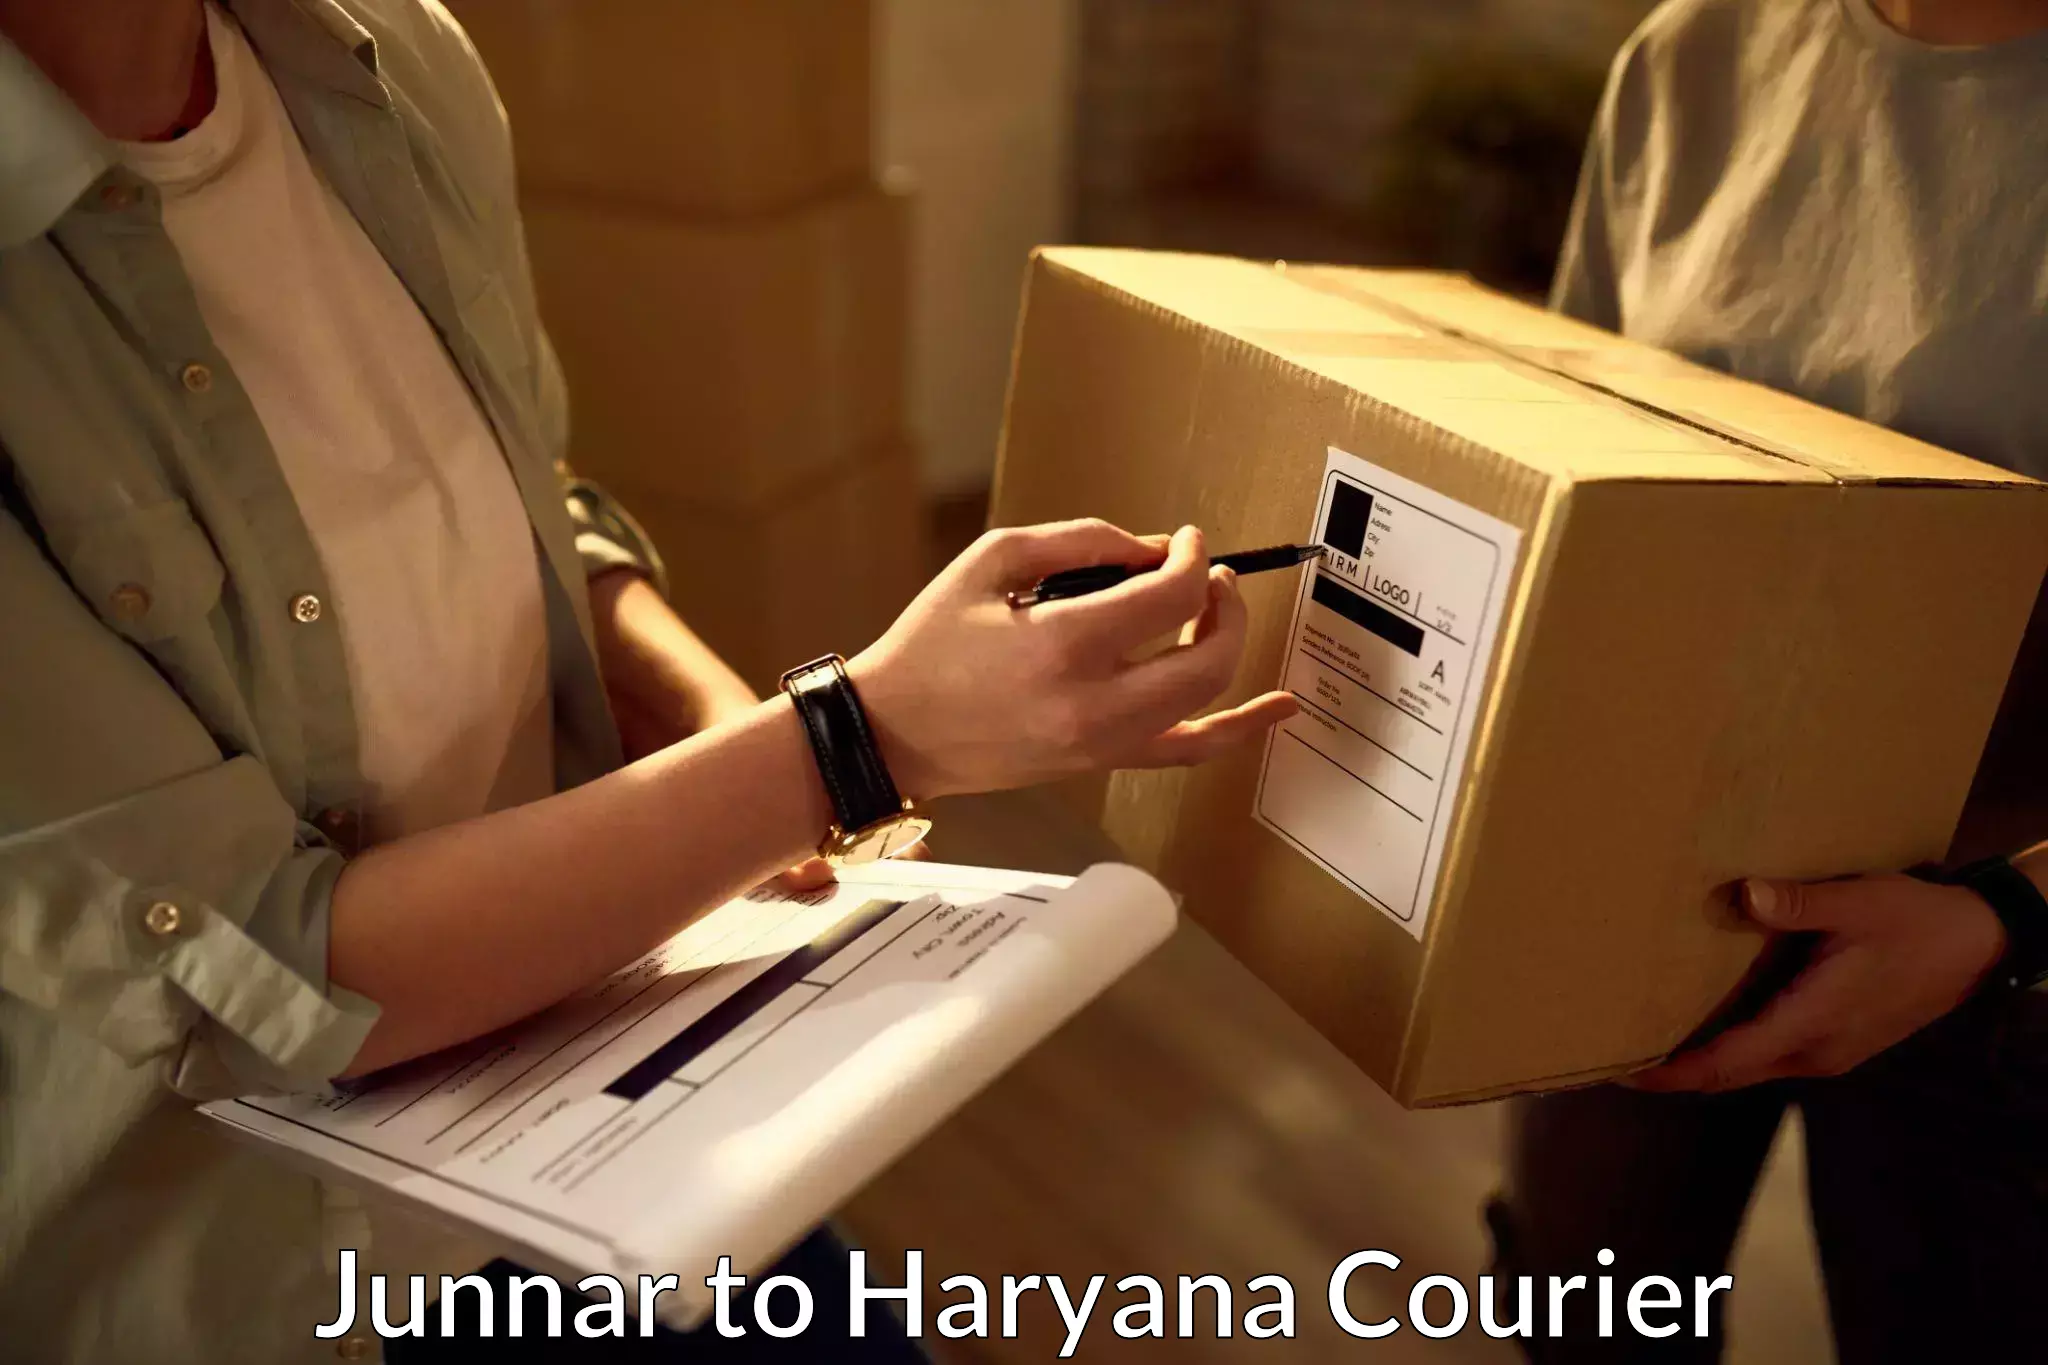 Large-scale shipping solutions Junnar to Charkhi Dadri